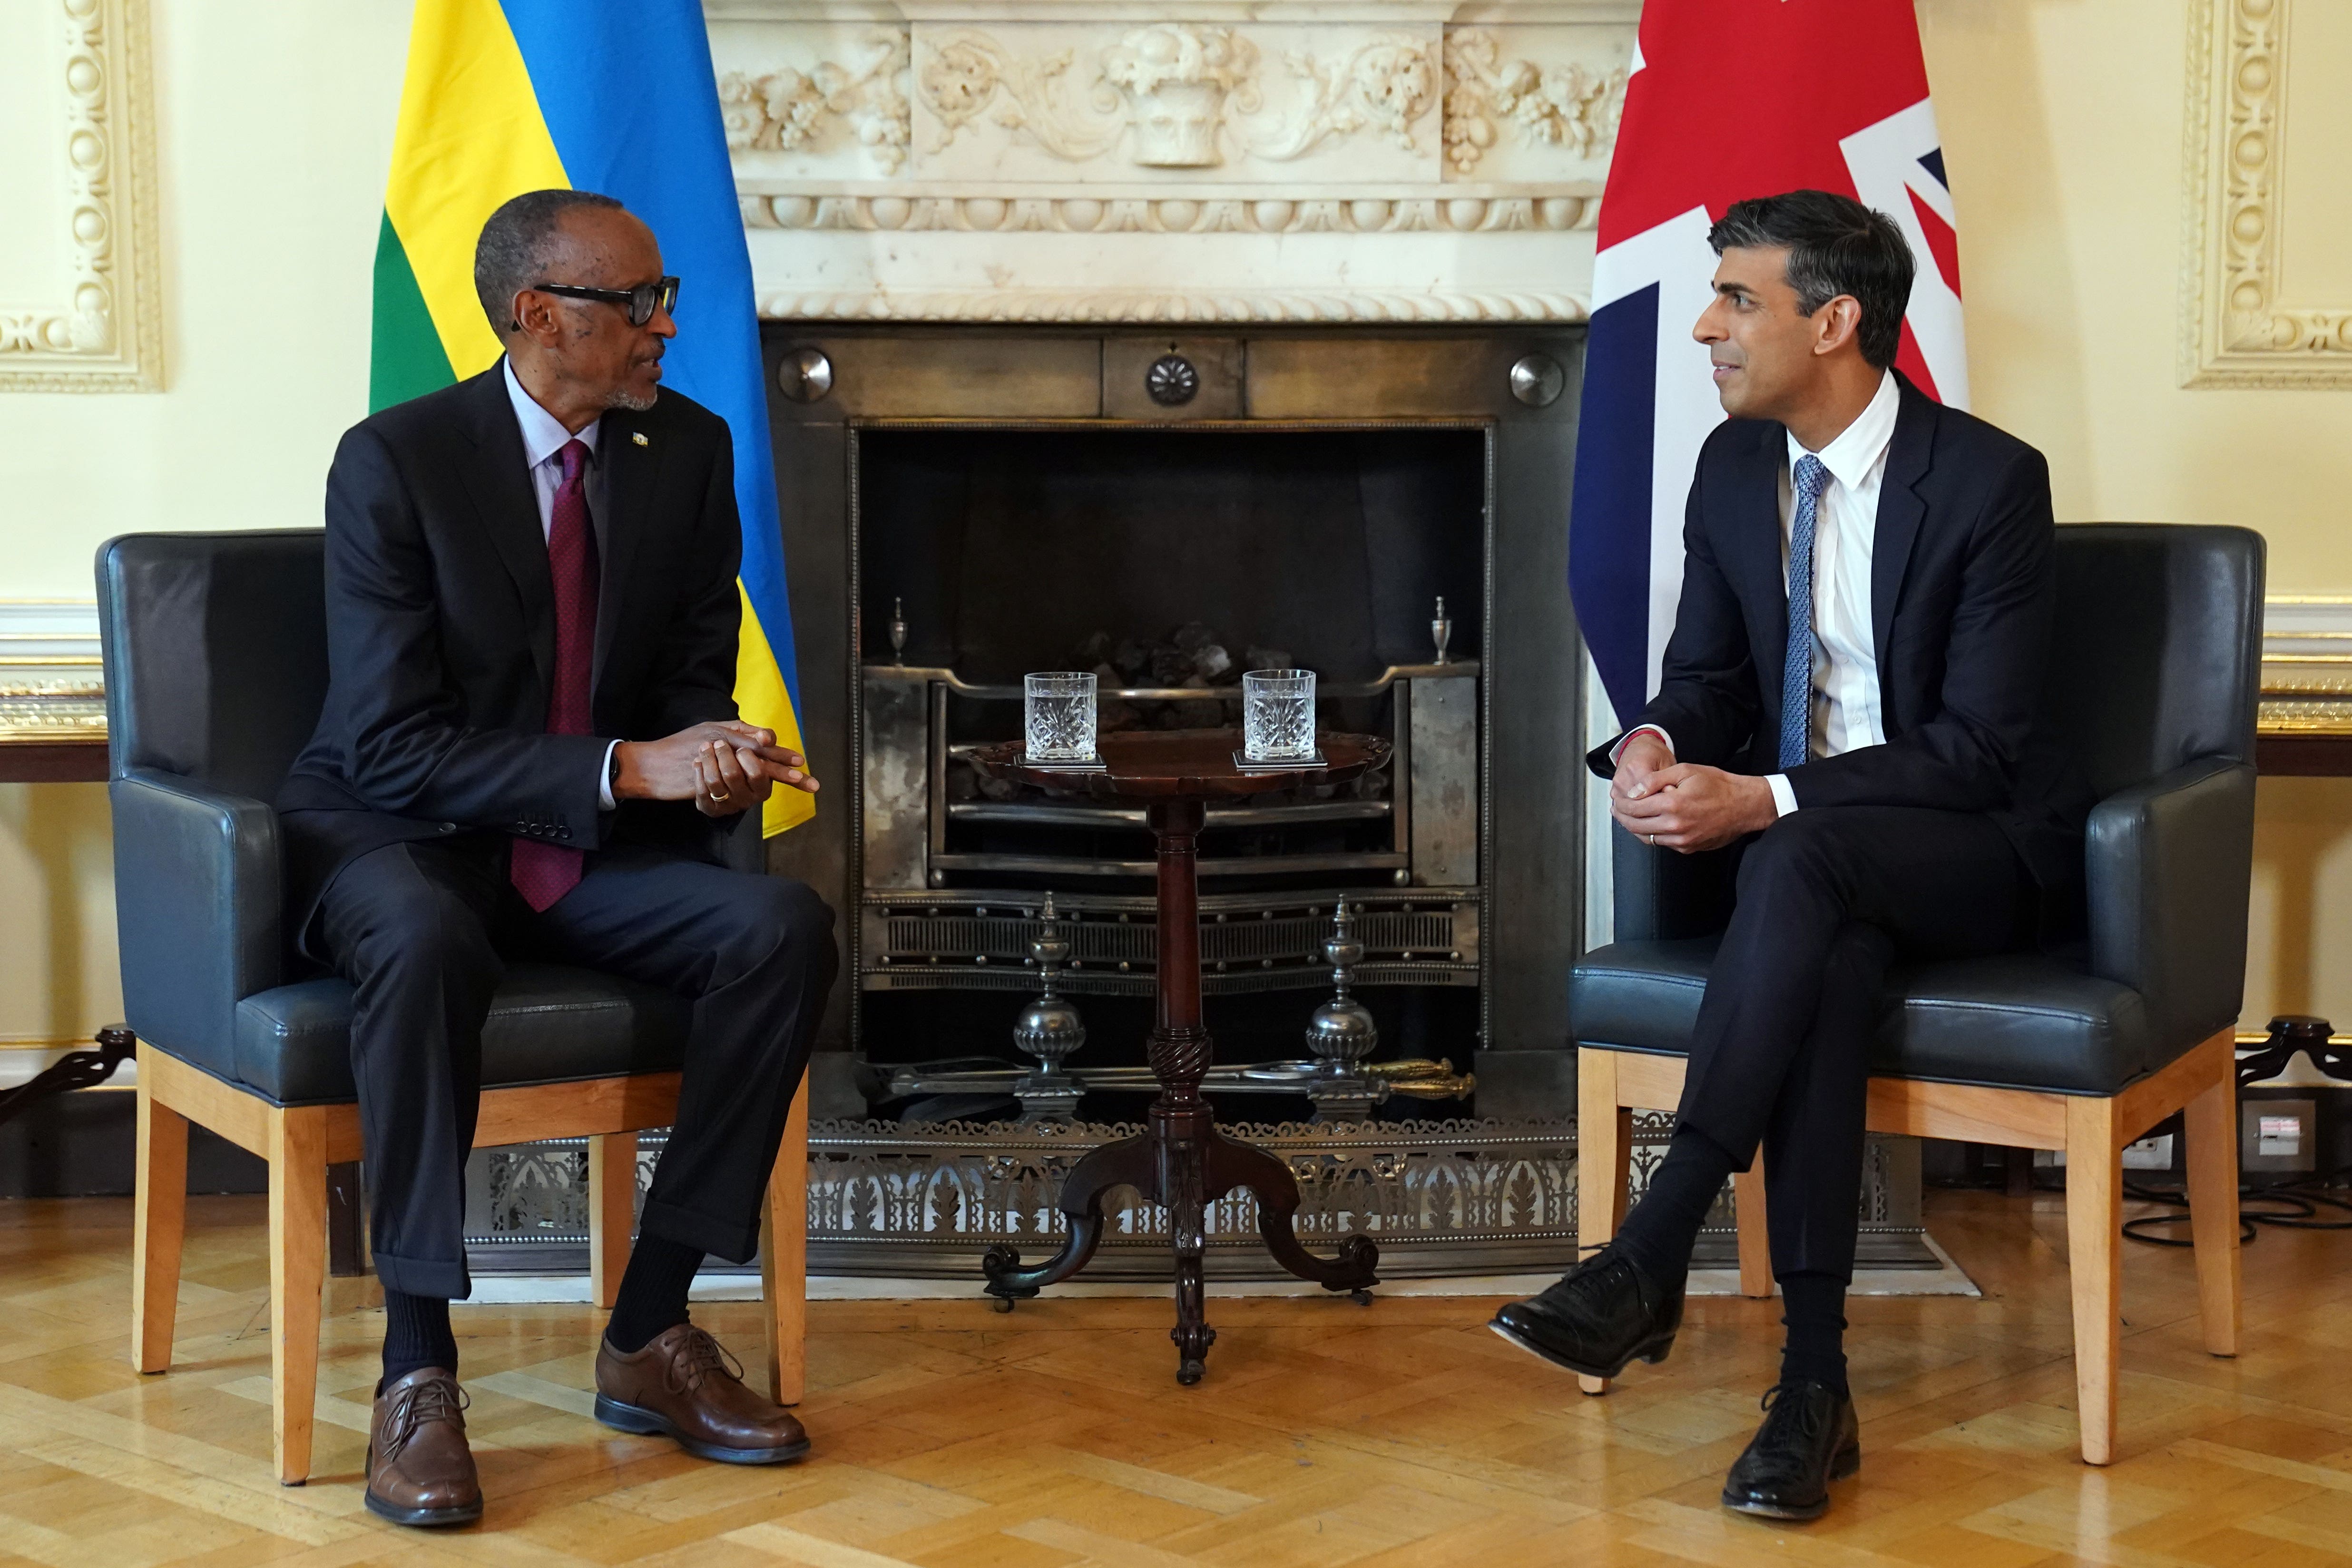 Rishi Sunak, one of the richest politicians ever to enter Downing Street, with the president of Rwanda, Paul Kagame